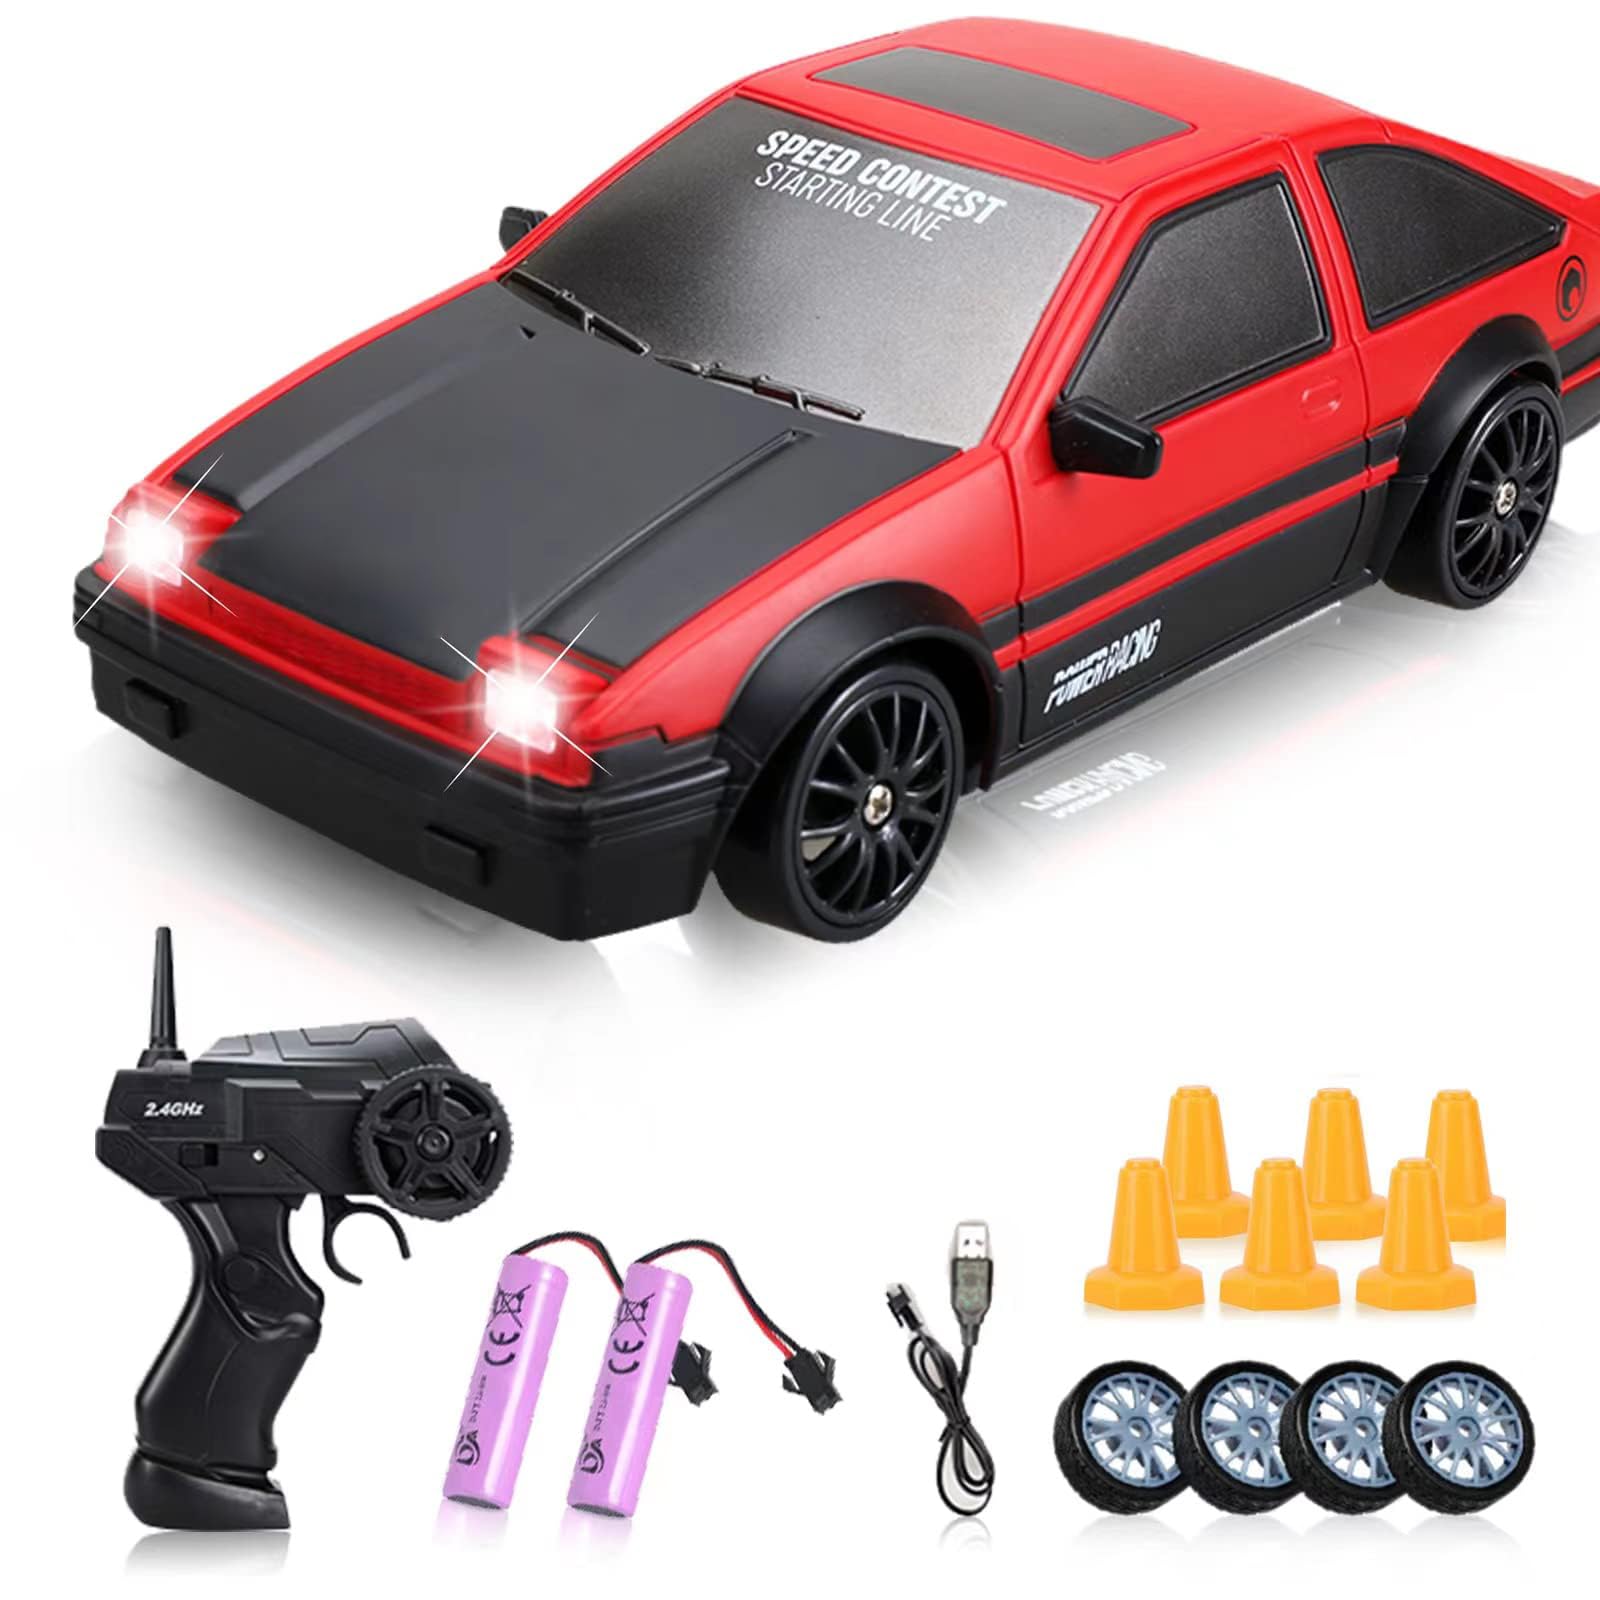 YUAN PLAN RC Drift Car, 1:24 Remote Control High Speed Race Drifting Cars, 2.4GHz 4WD Electric Sport Racing Hobby Toy Car with Two Batteries Headlight for Boys and Girls Teens and Adults Gift (Red)